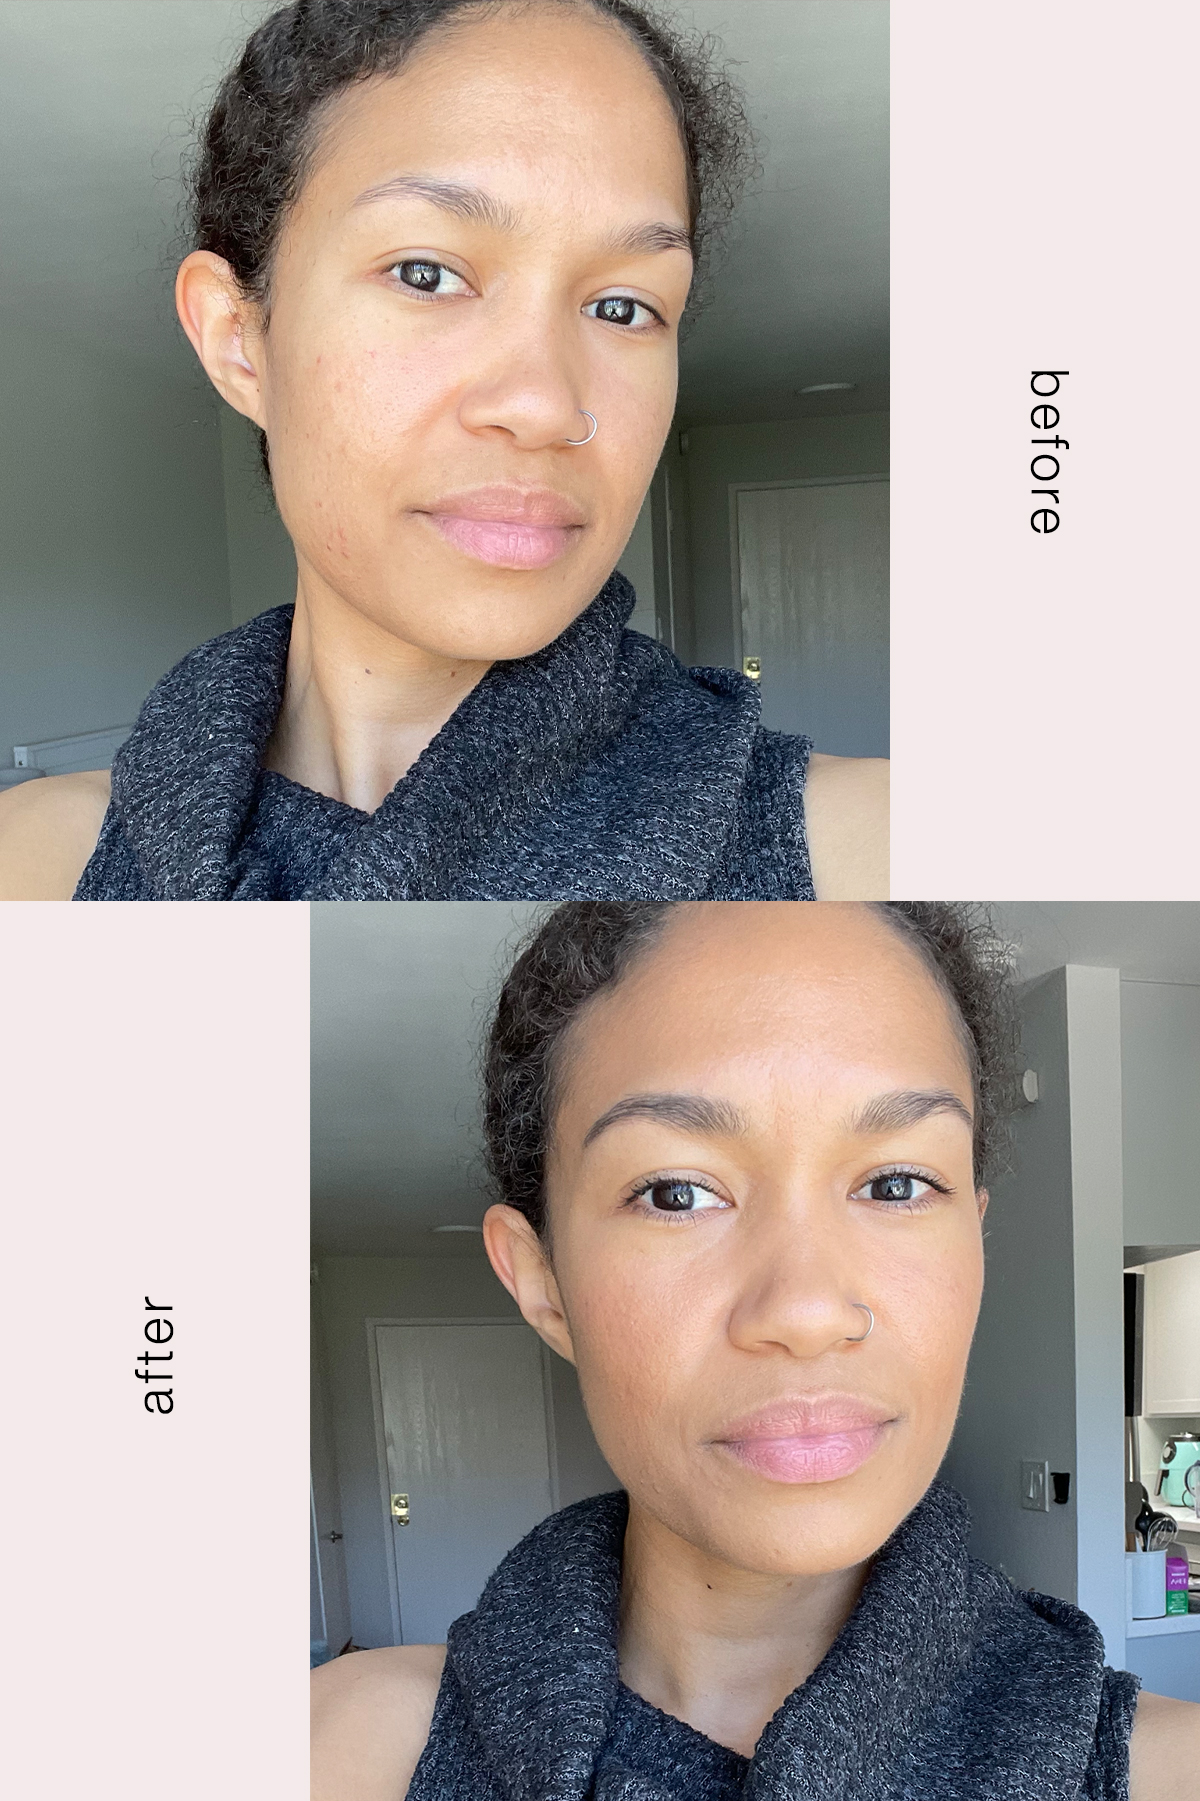 Kvalifikation At give tilladelse Dwell Our Beauty Team Reviews Make Up Forever's HD Skin Foundation | Who What Wear